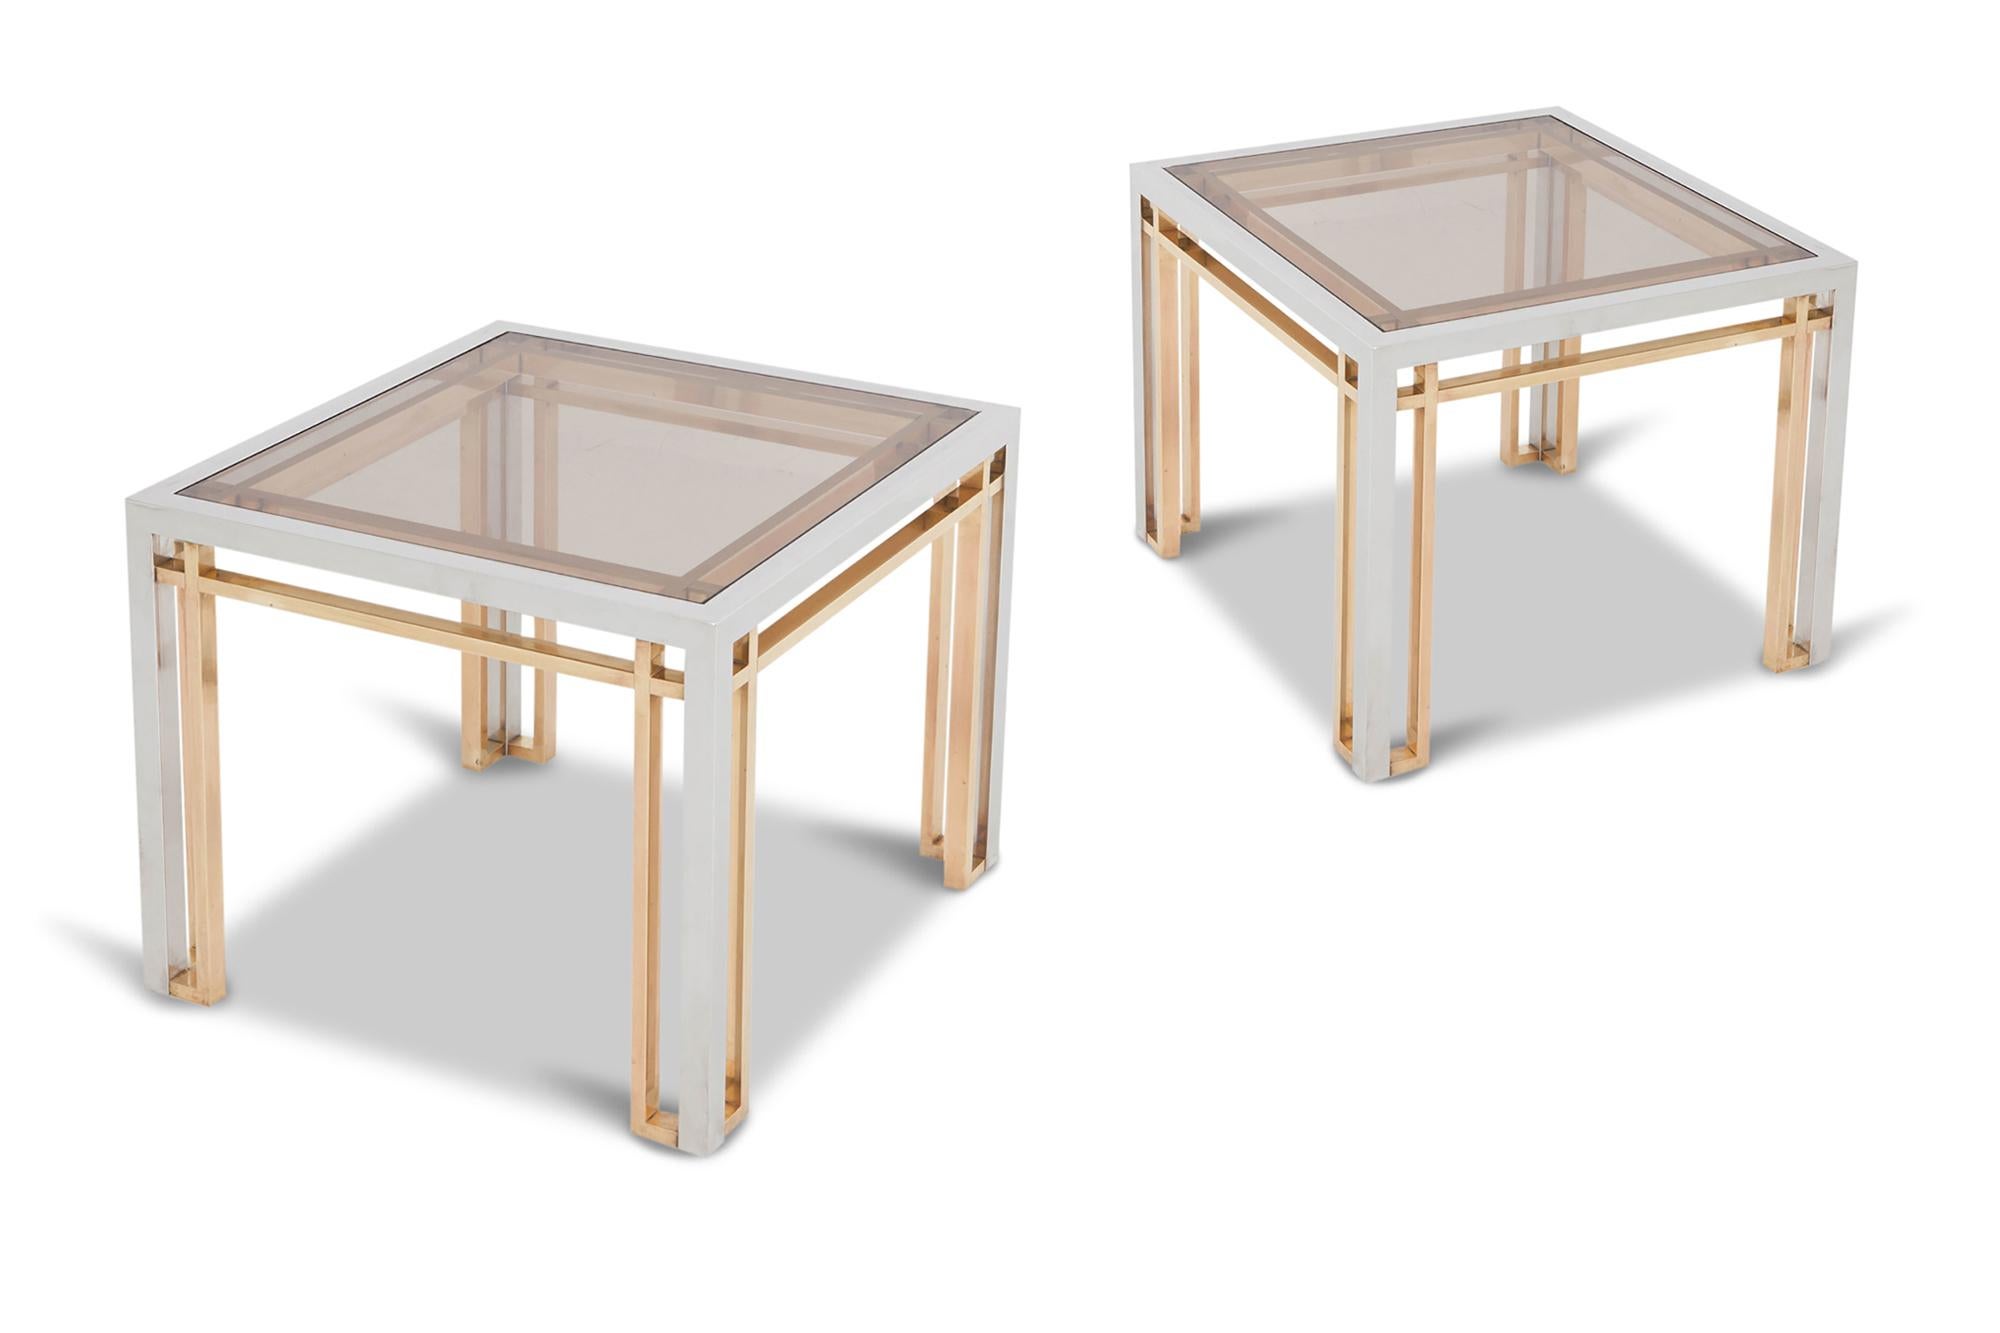 Hollywood Regency square side table’s by Romeo Rega, Italy, 1970s.

A well-known design by the master. A chrome-plated frame, finished with brass details, resulting
in a stunning, rich contrast and beautiful lining. Both tops are fitted with